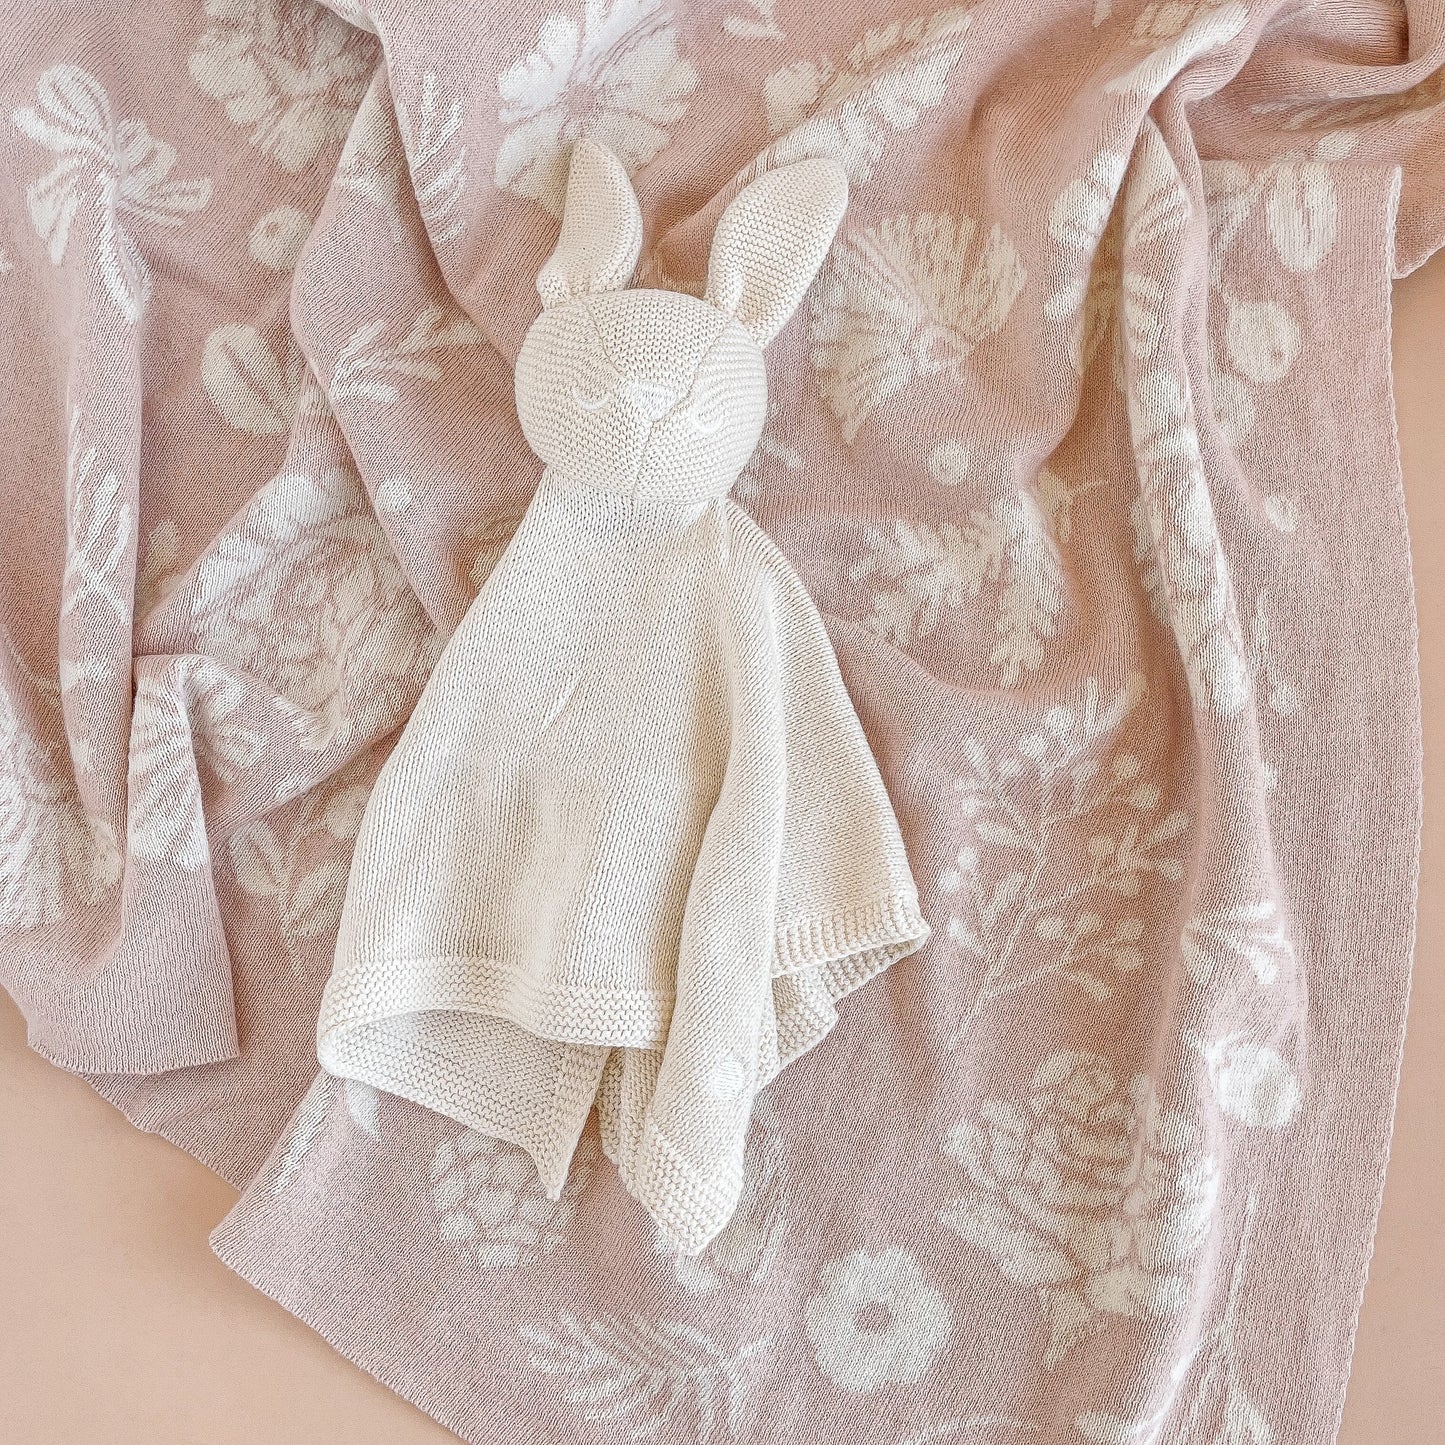 Floral Blanket & Bunny Lovey Baby Gift Set | Organic Cotton